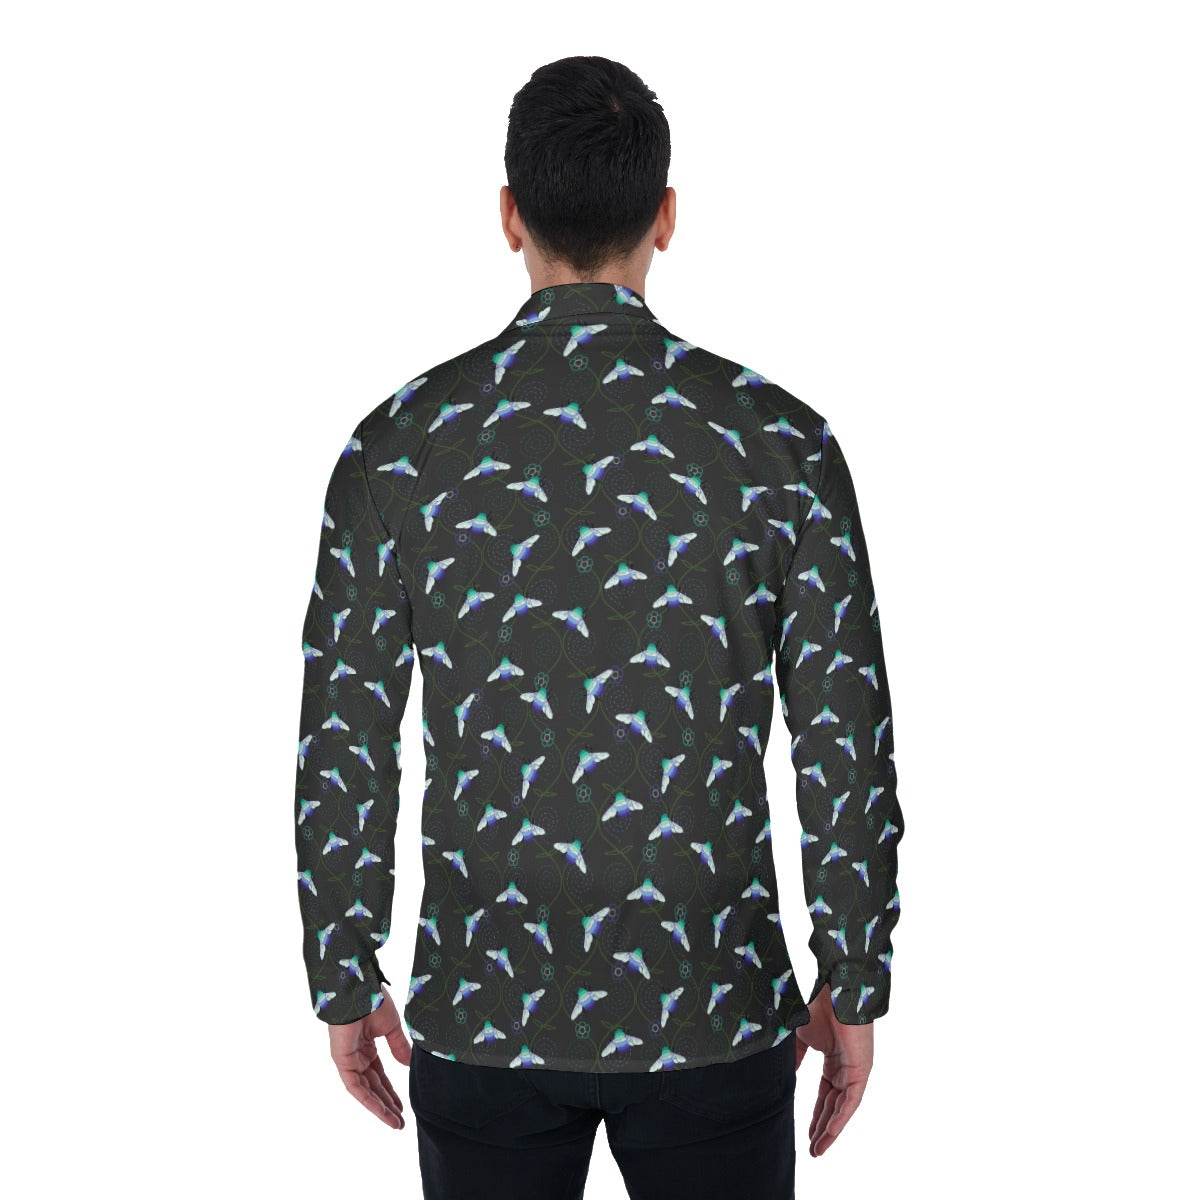 Bumblebee and Vine Pattern 4-Way Stretch Long Sleeve Shirt with Collar | Relaxed Fit | Choose Your Colourway